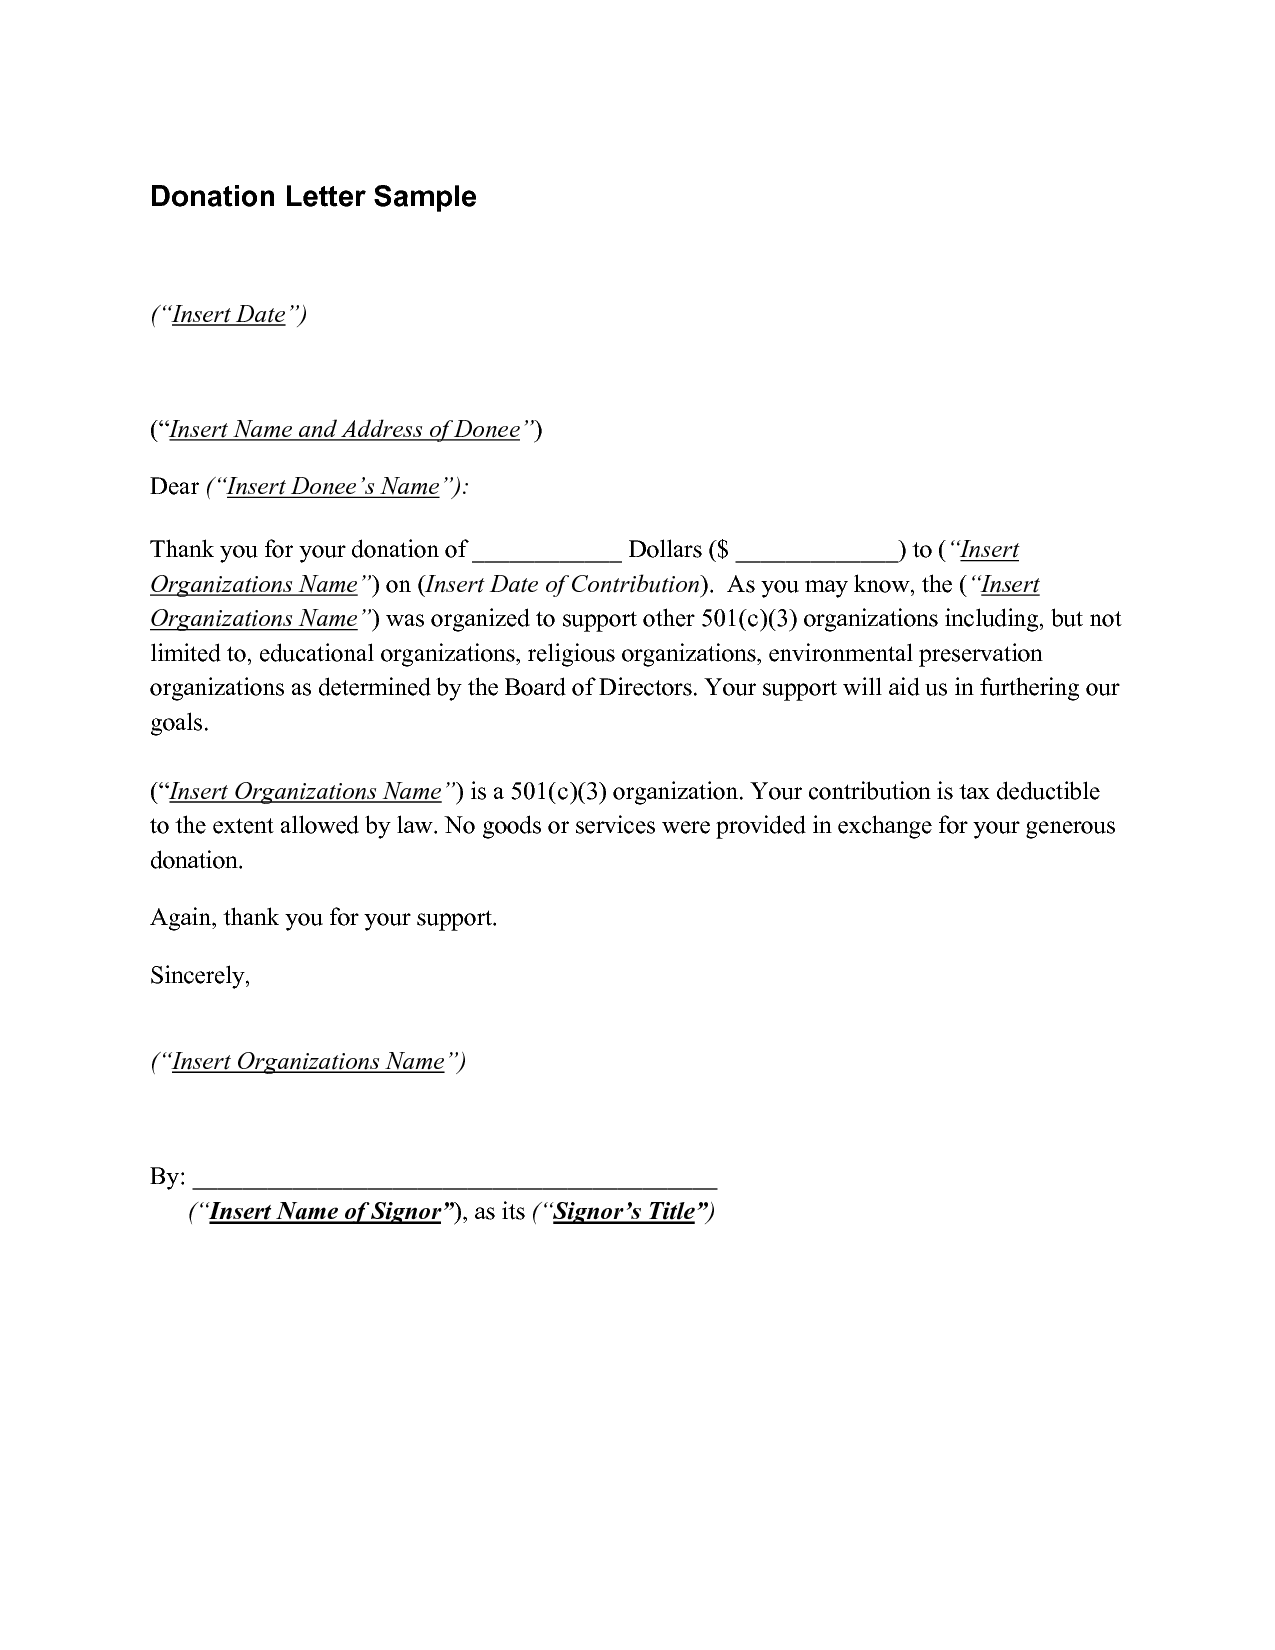 Letter Template For Donations Request